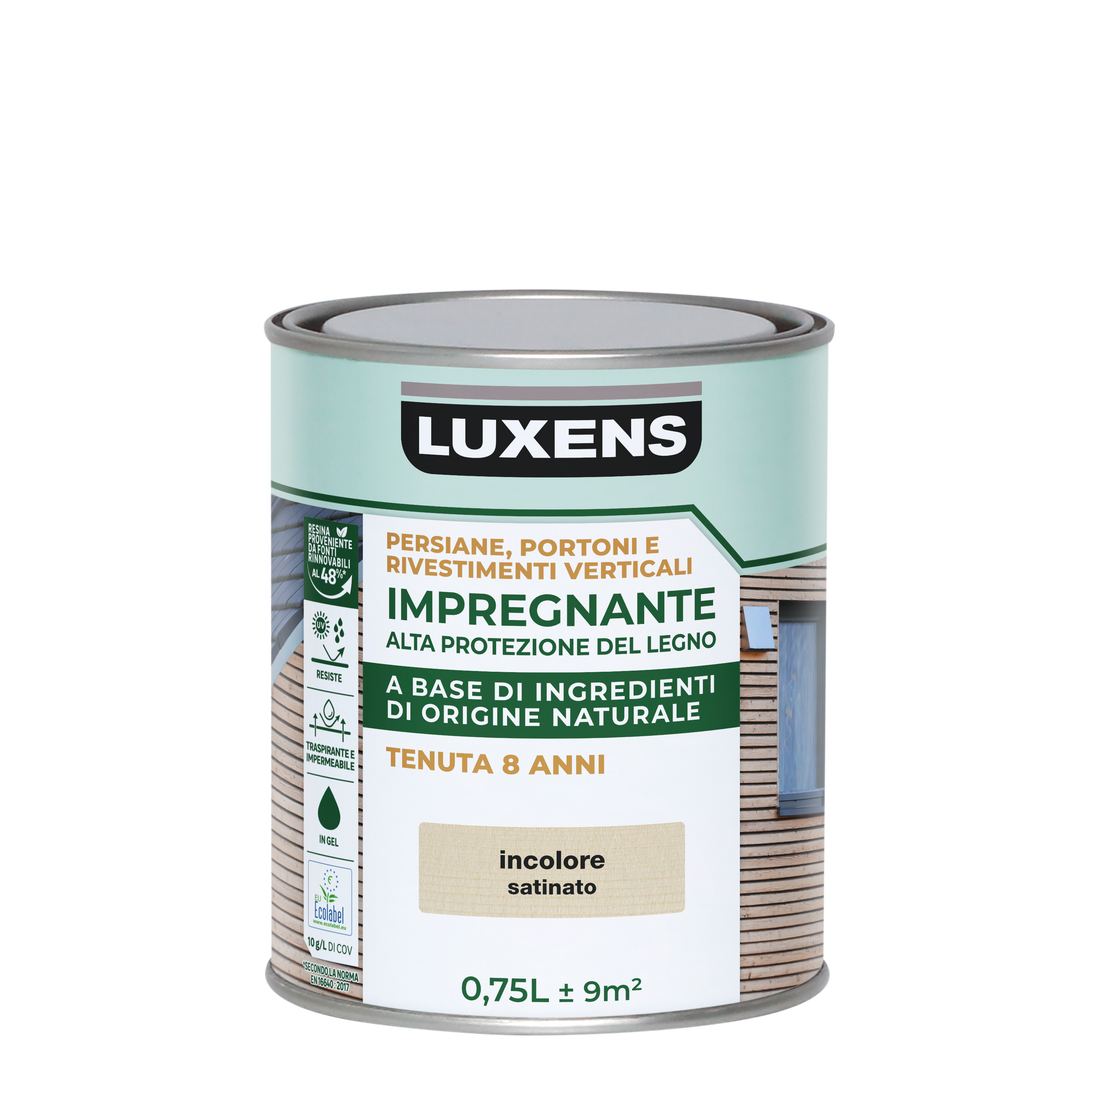 LUXENS HIGH-PROTECTION COLOURLESS BIO-BASED WOOD PRESERVATIVE 750 ML